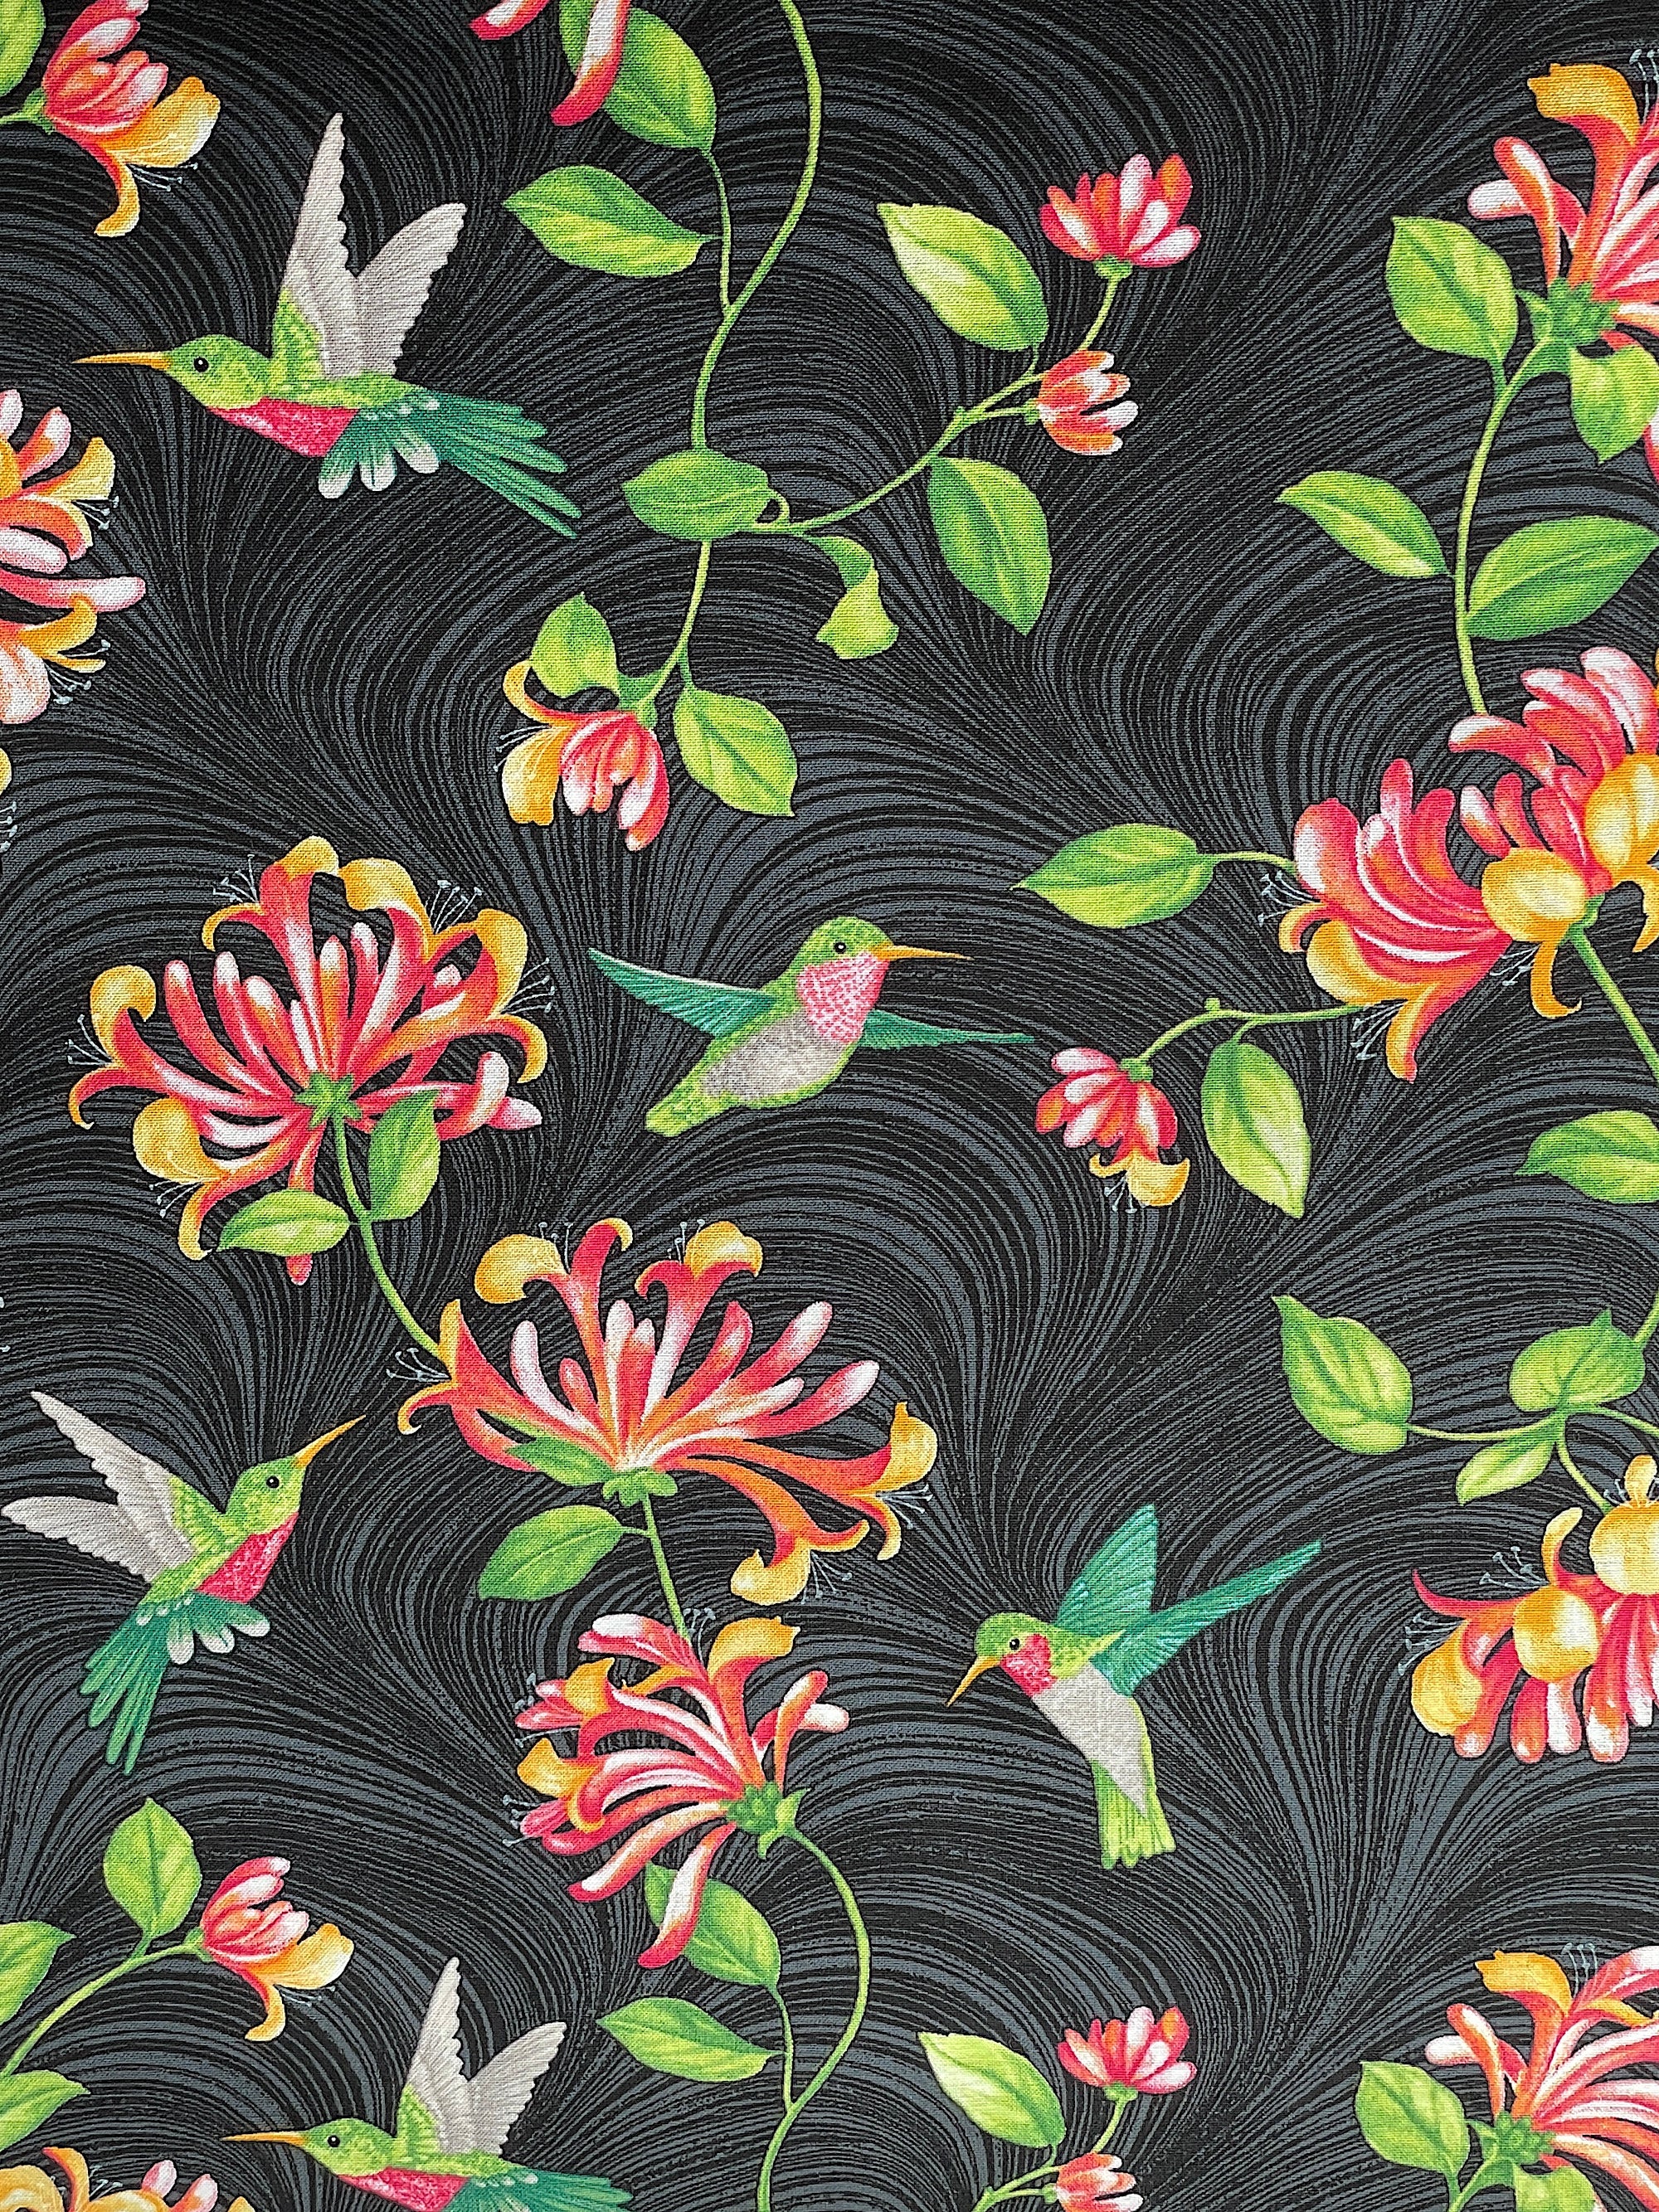 Black cotton fabric covered with hummingbirds and flowers.